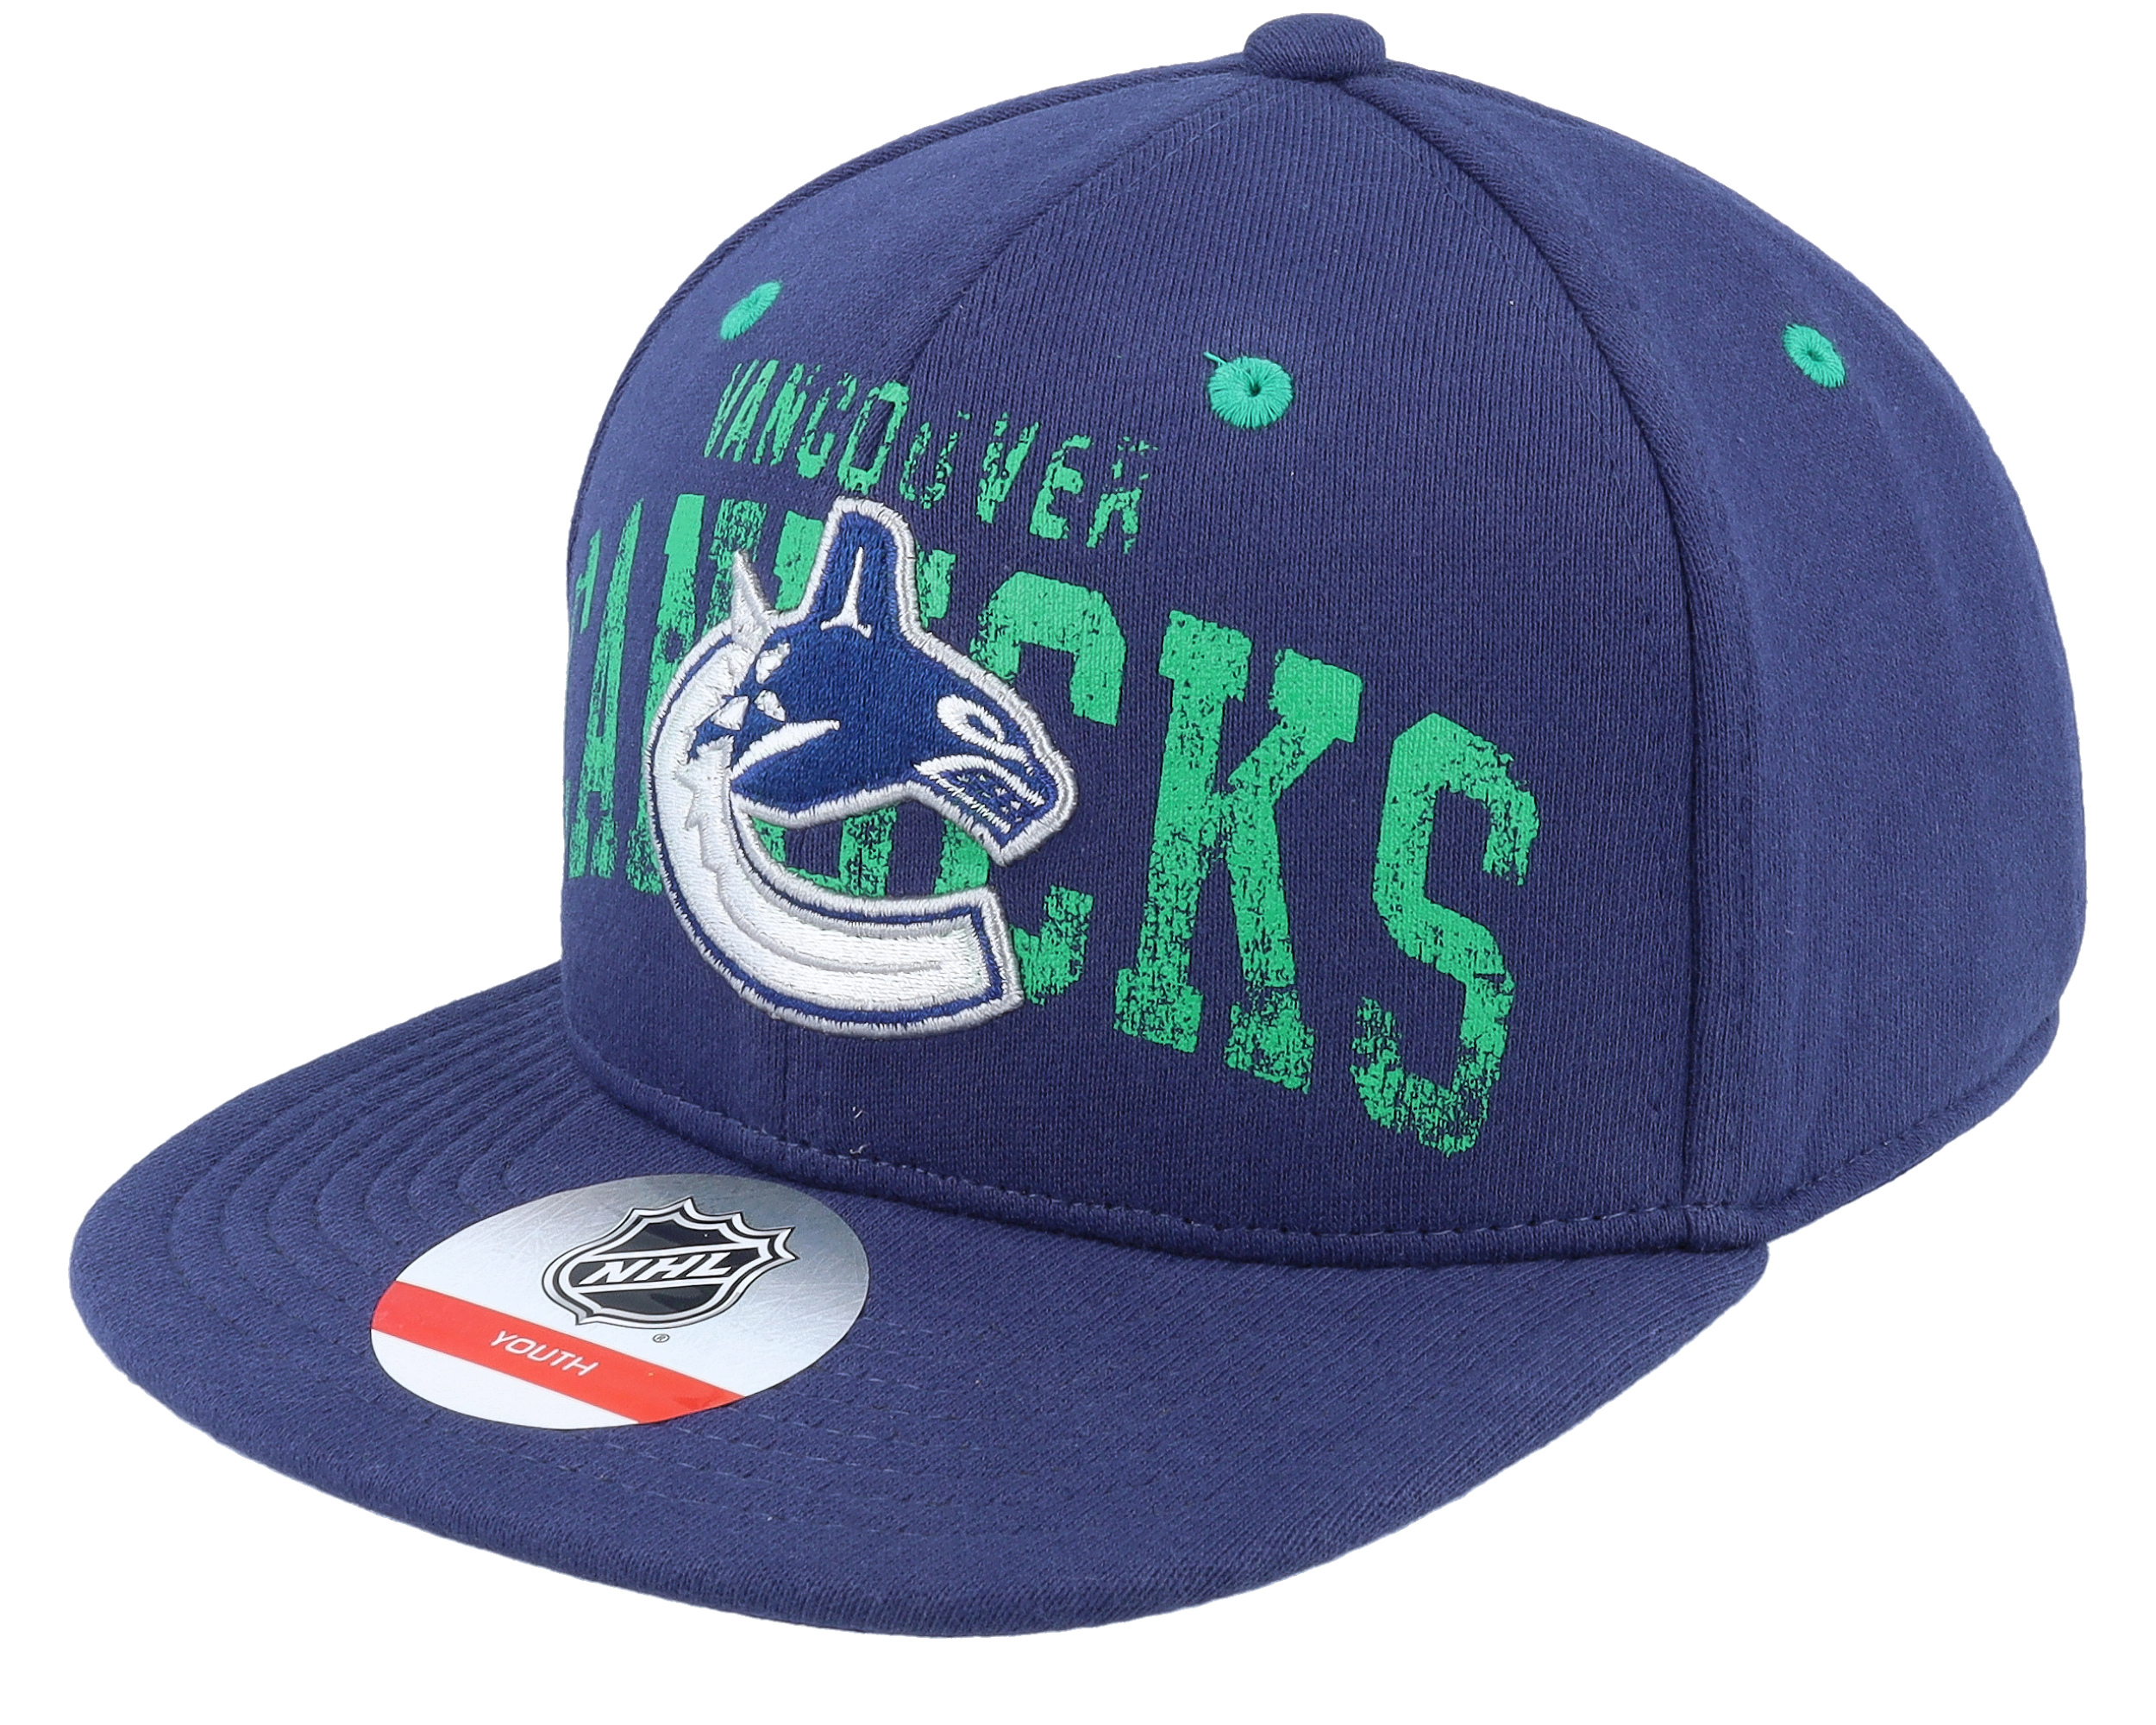  Outerstuff NHL NHL Vancouver Canucks Kids & Youth